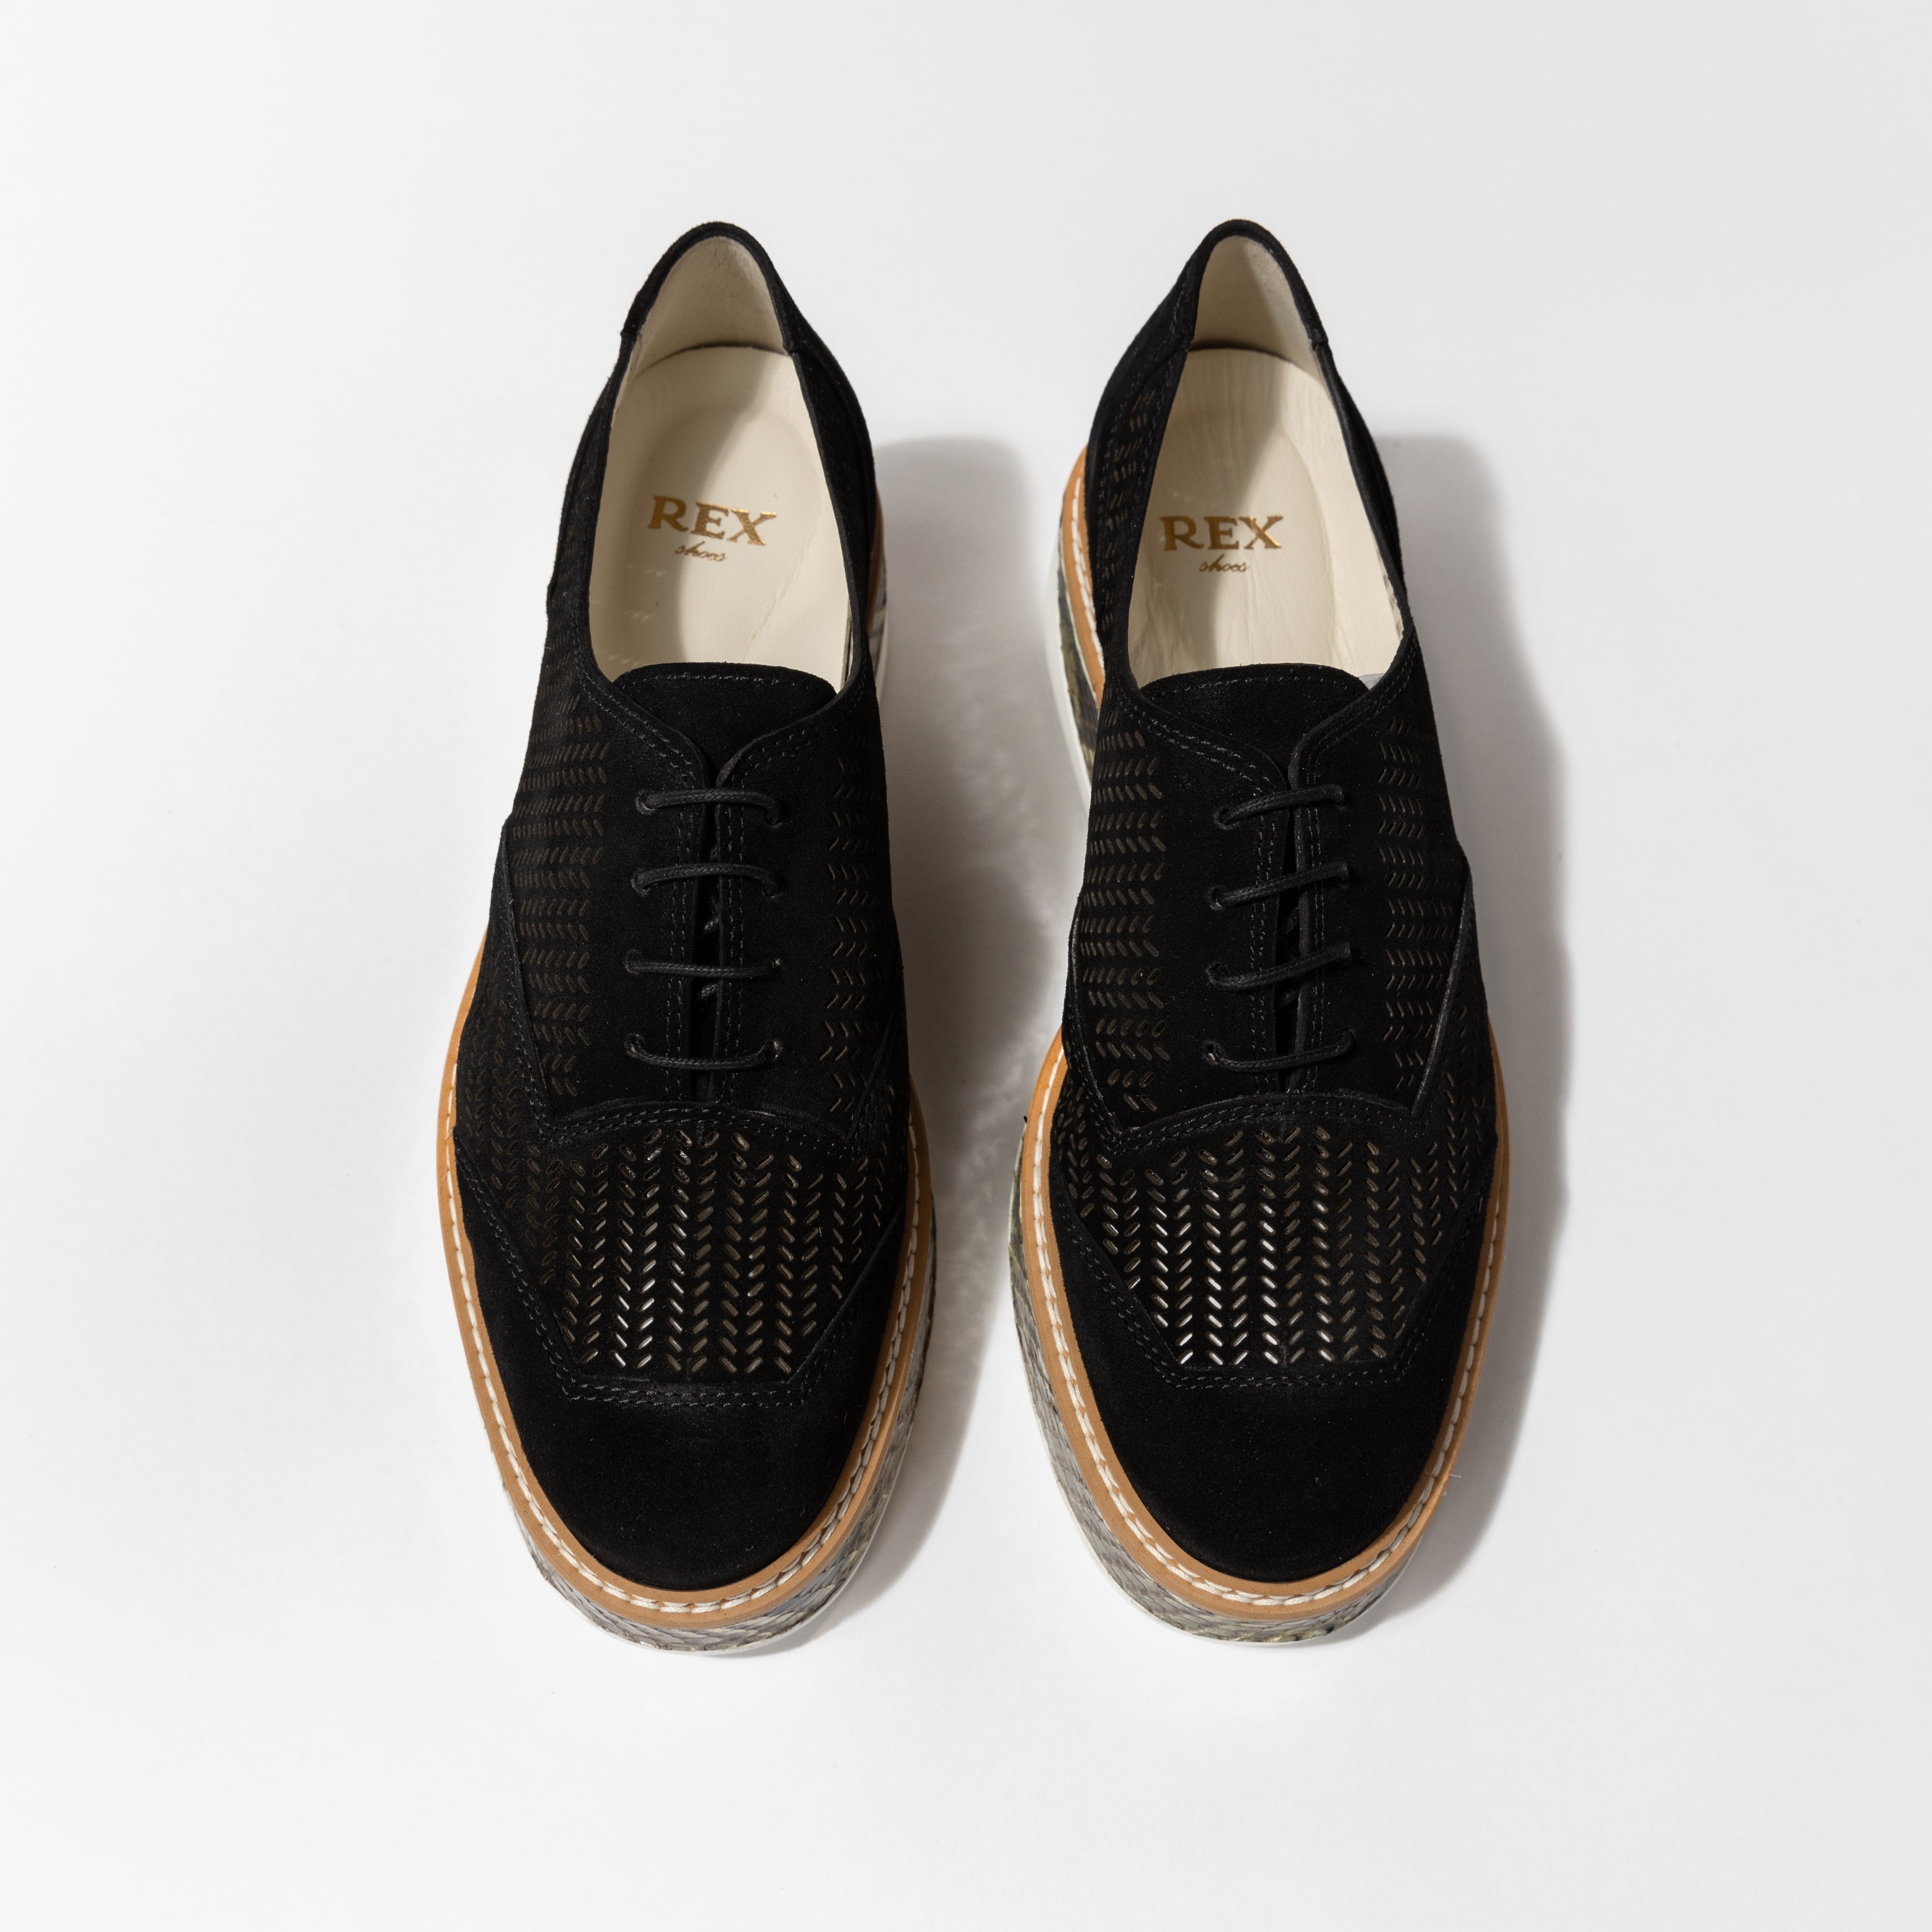 Top view of the &#39;Liz&#39; Tie-Up Oxford shoes in Black Suede with Black Leather detailing, featuring a custom perforated pattern and a classic lace-up design, handcrafted by Rex Shoes.